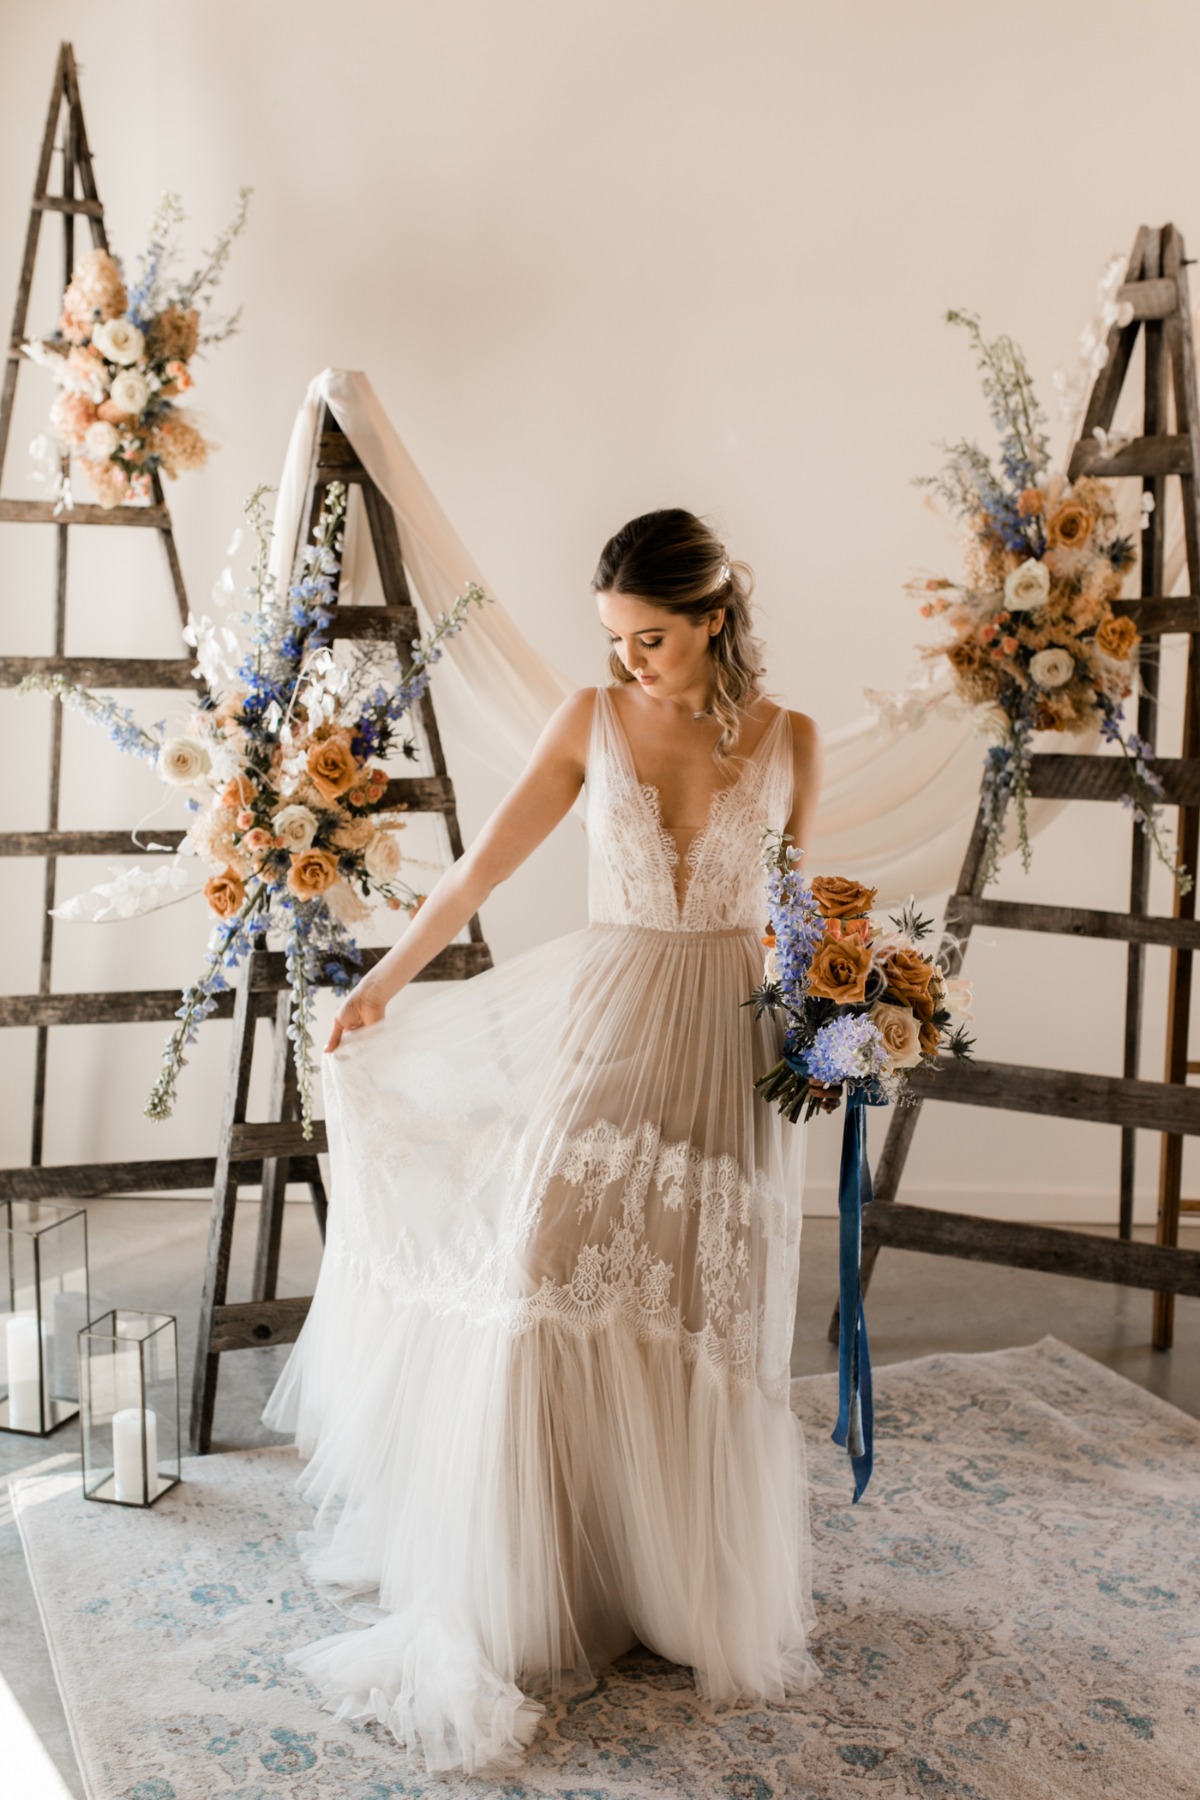 Clementine wedding dress by Willow